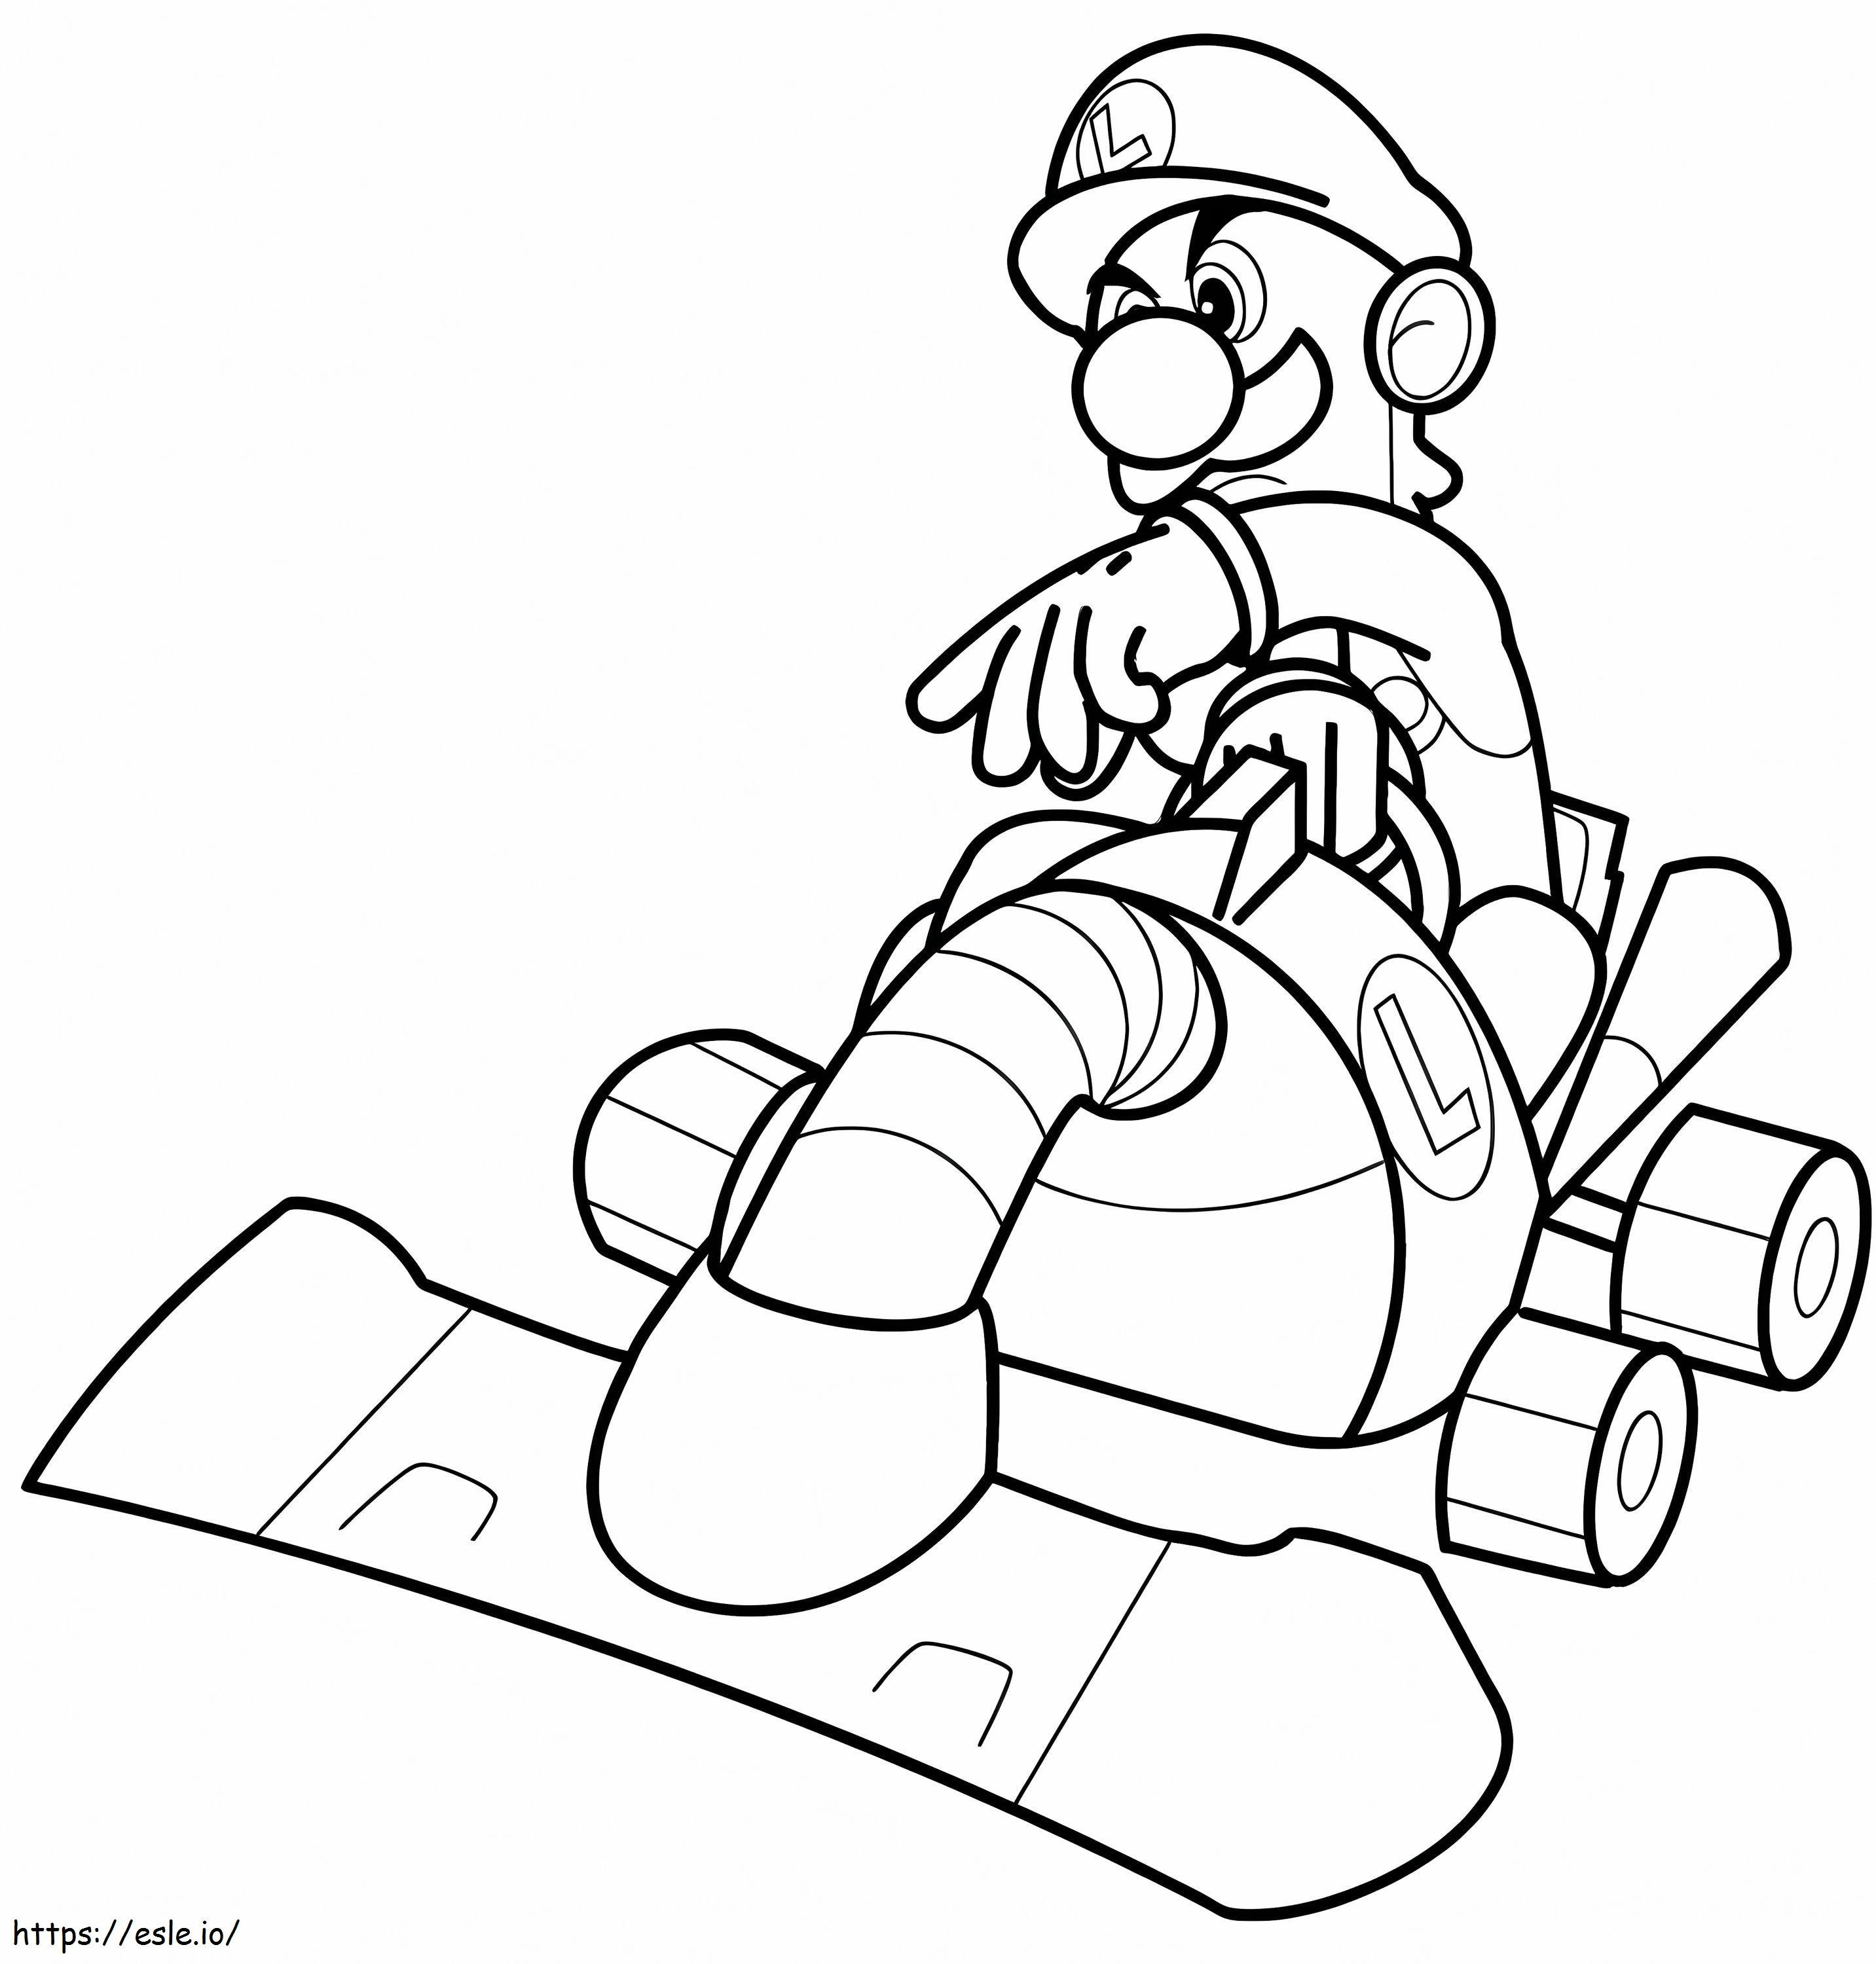 Grand Louis coloring page